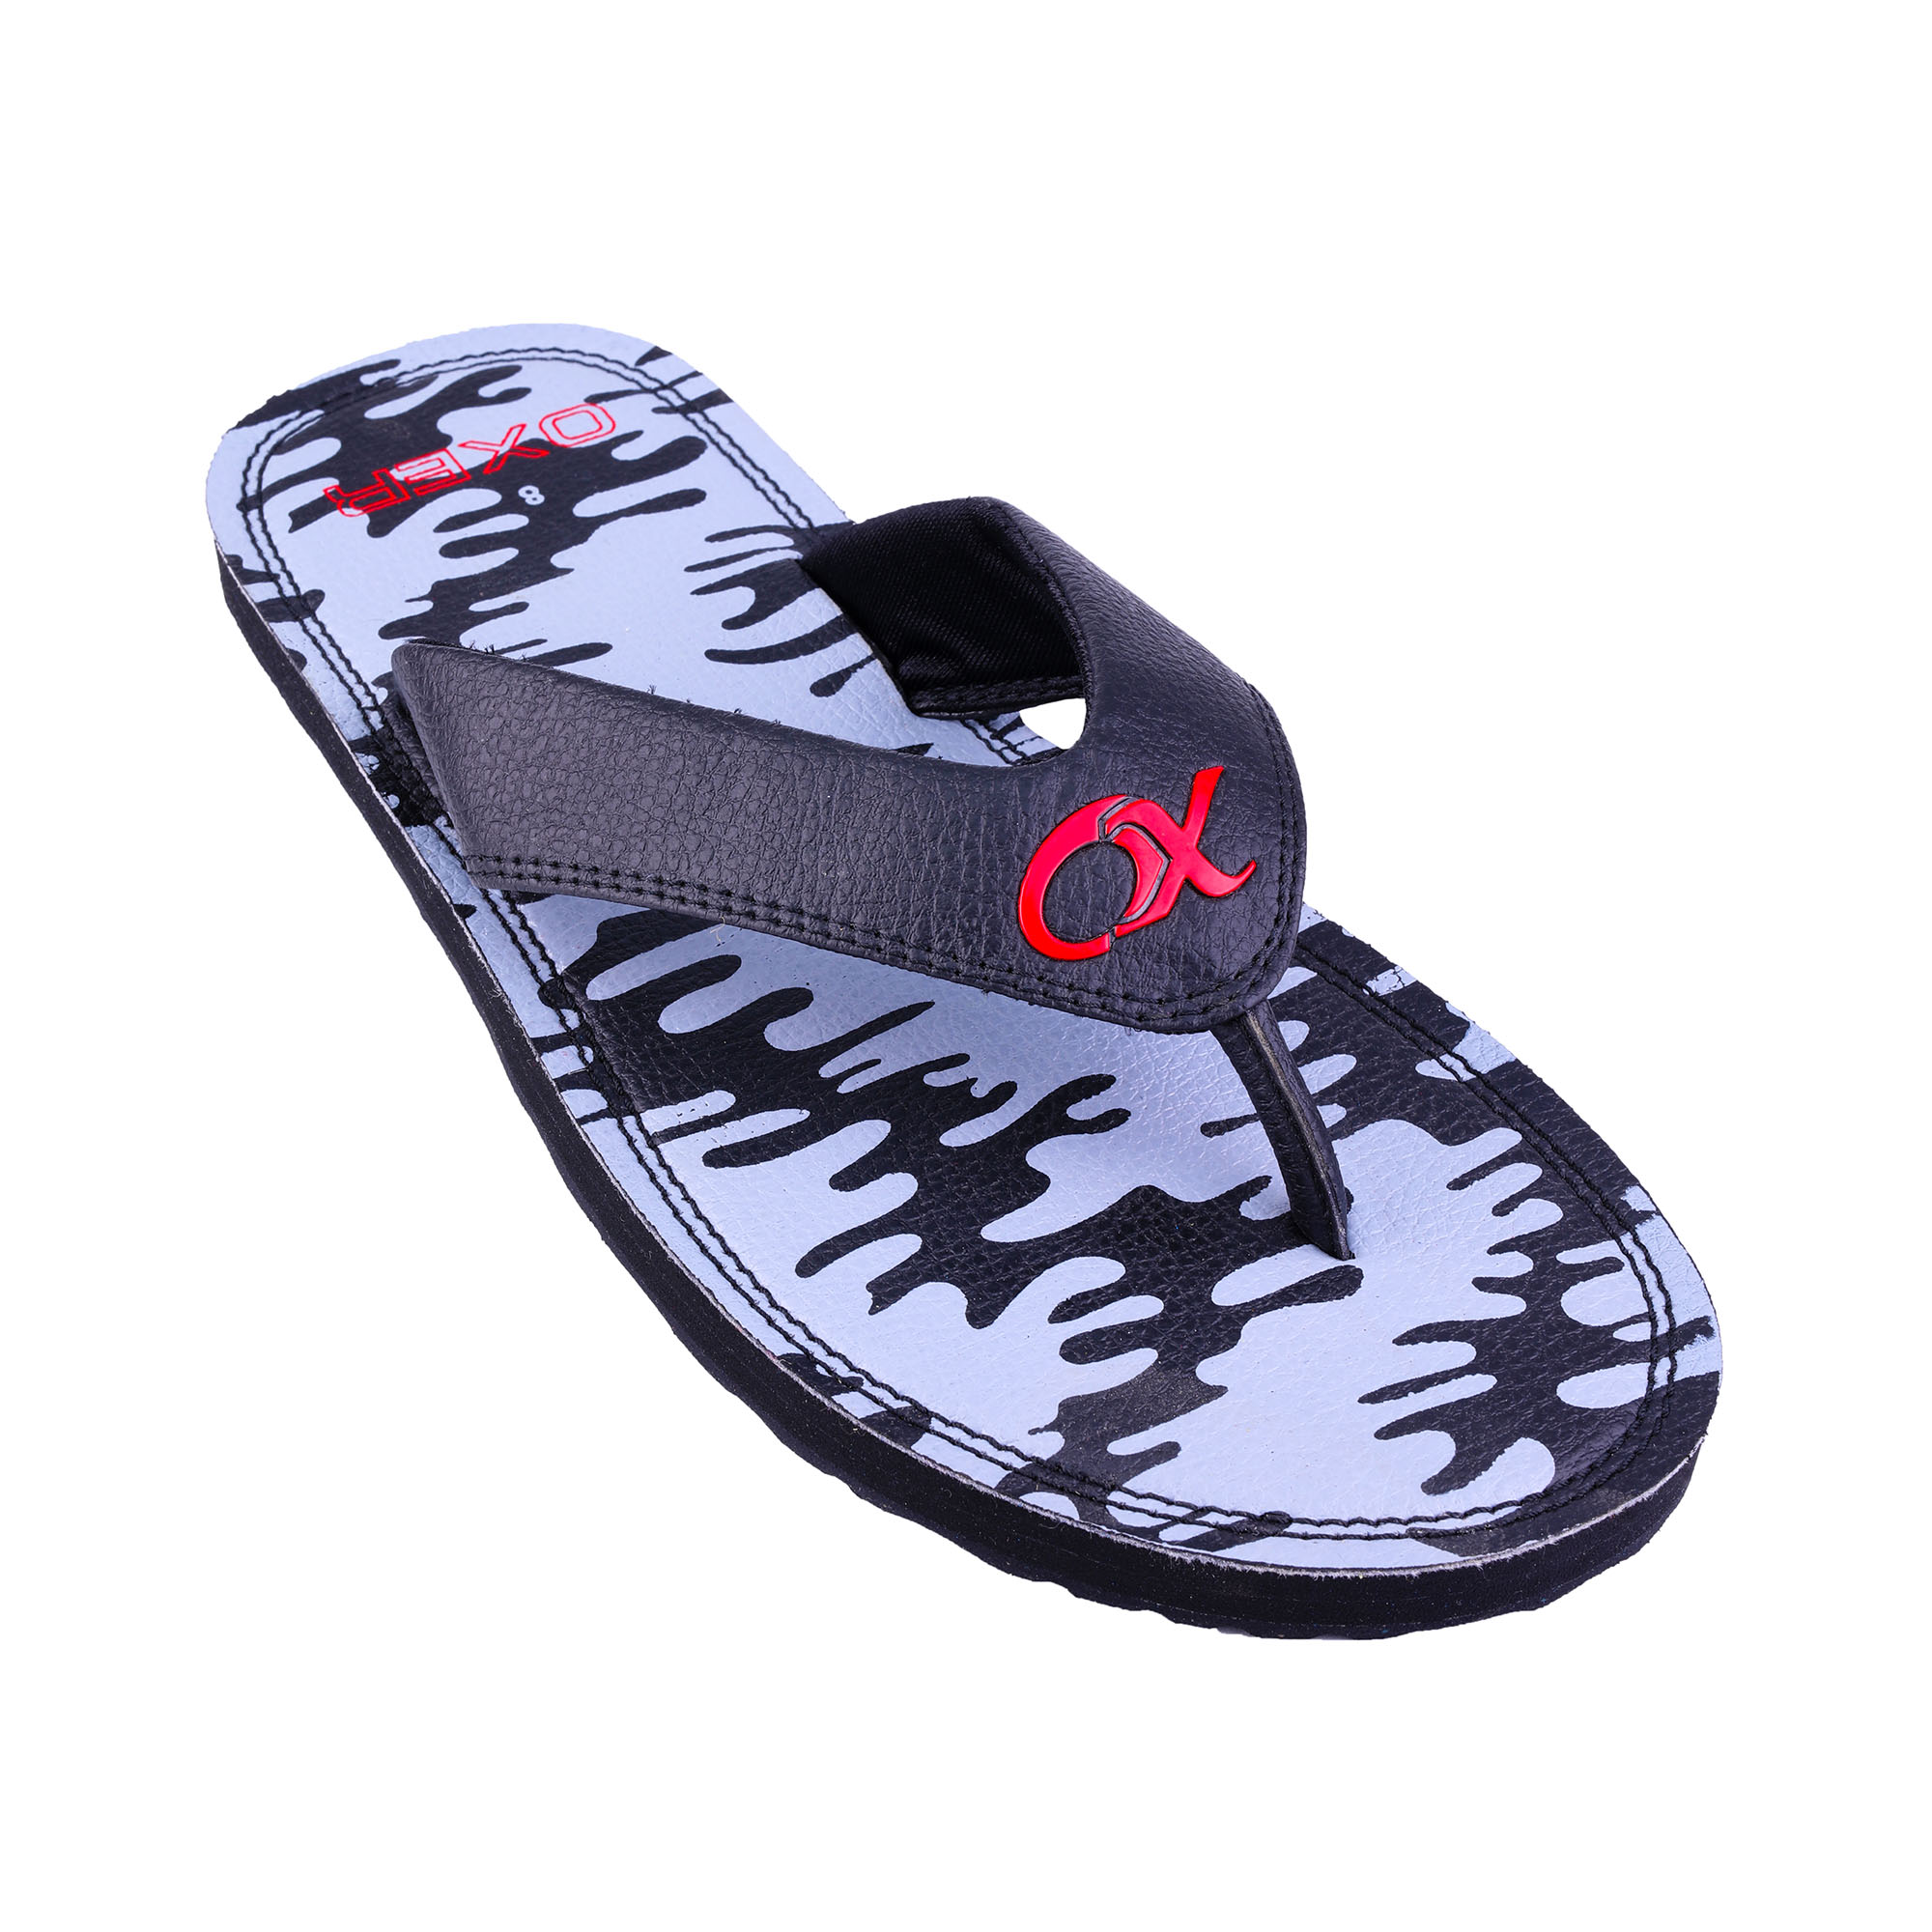 XOd BLACK/RED Men's Eva, Rubber, PU Flipflop Slippers -9 || Planet of toys